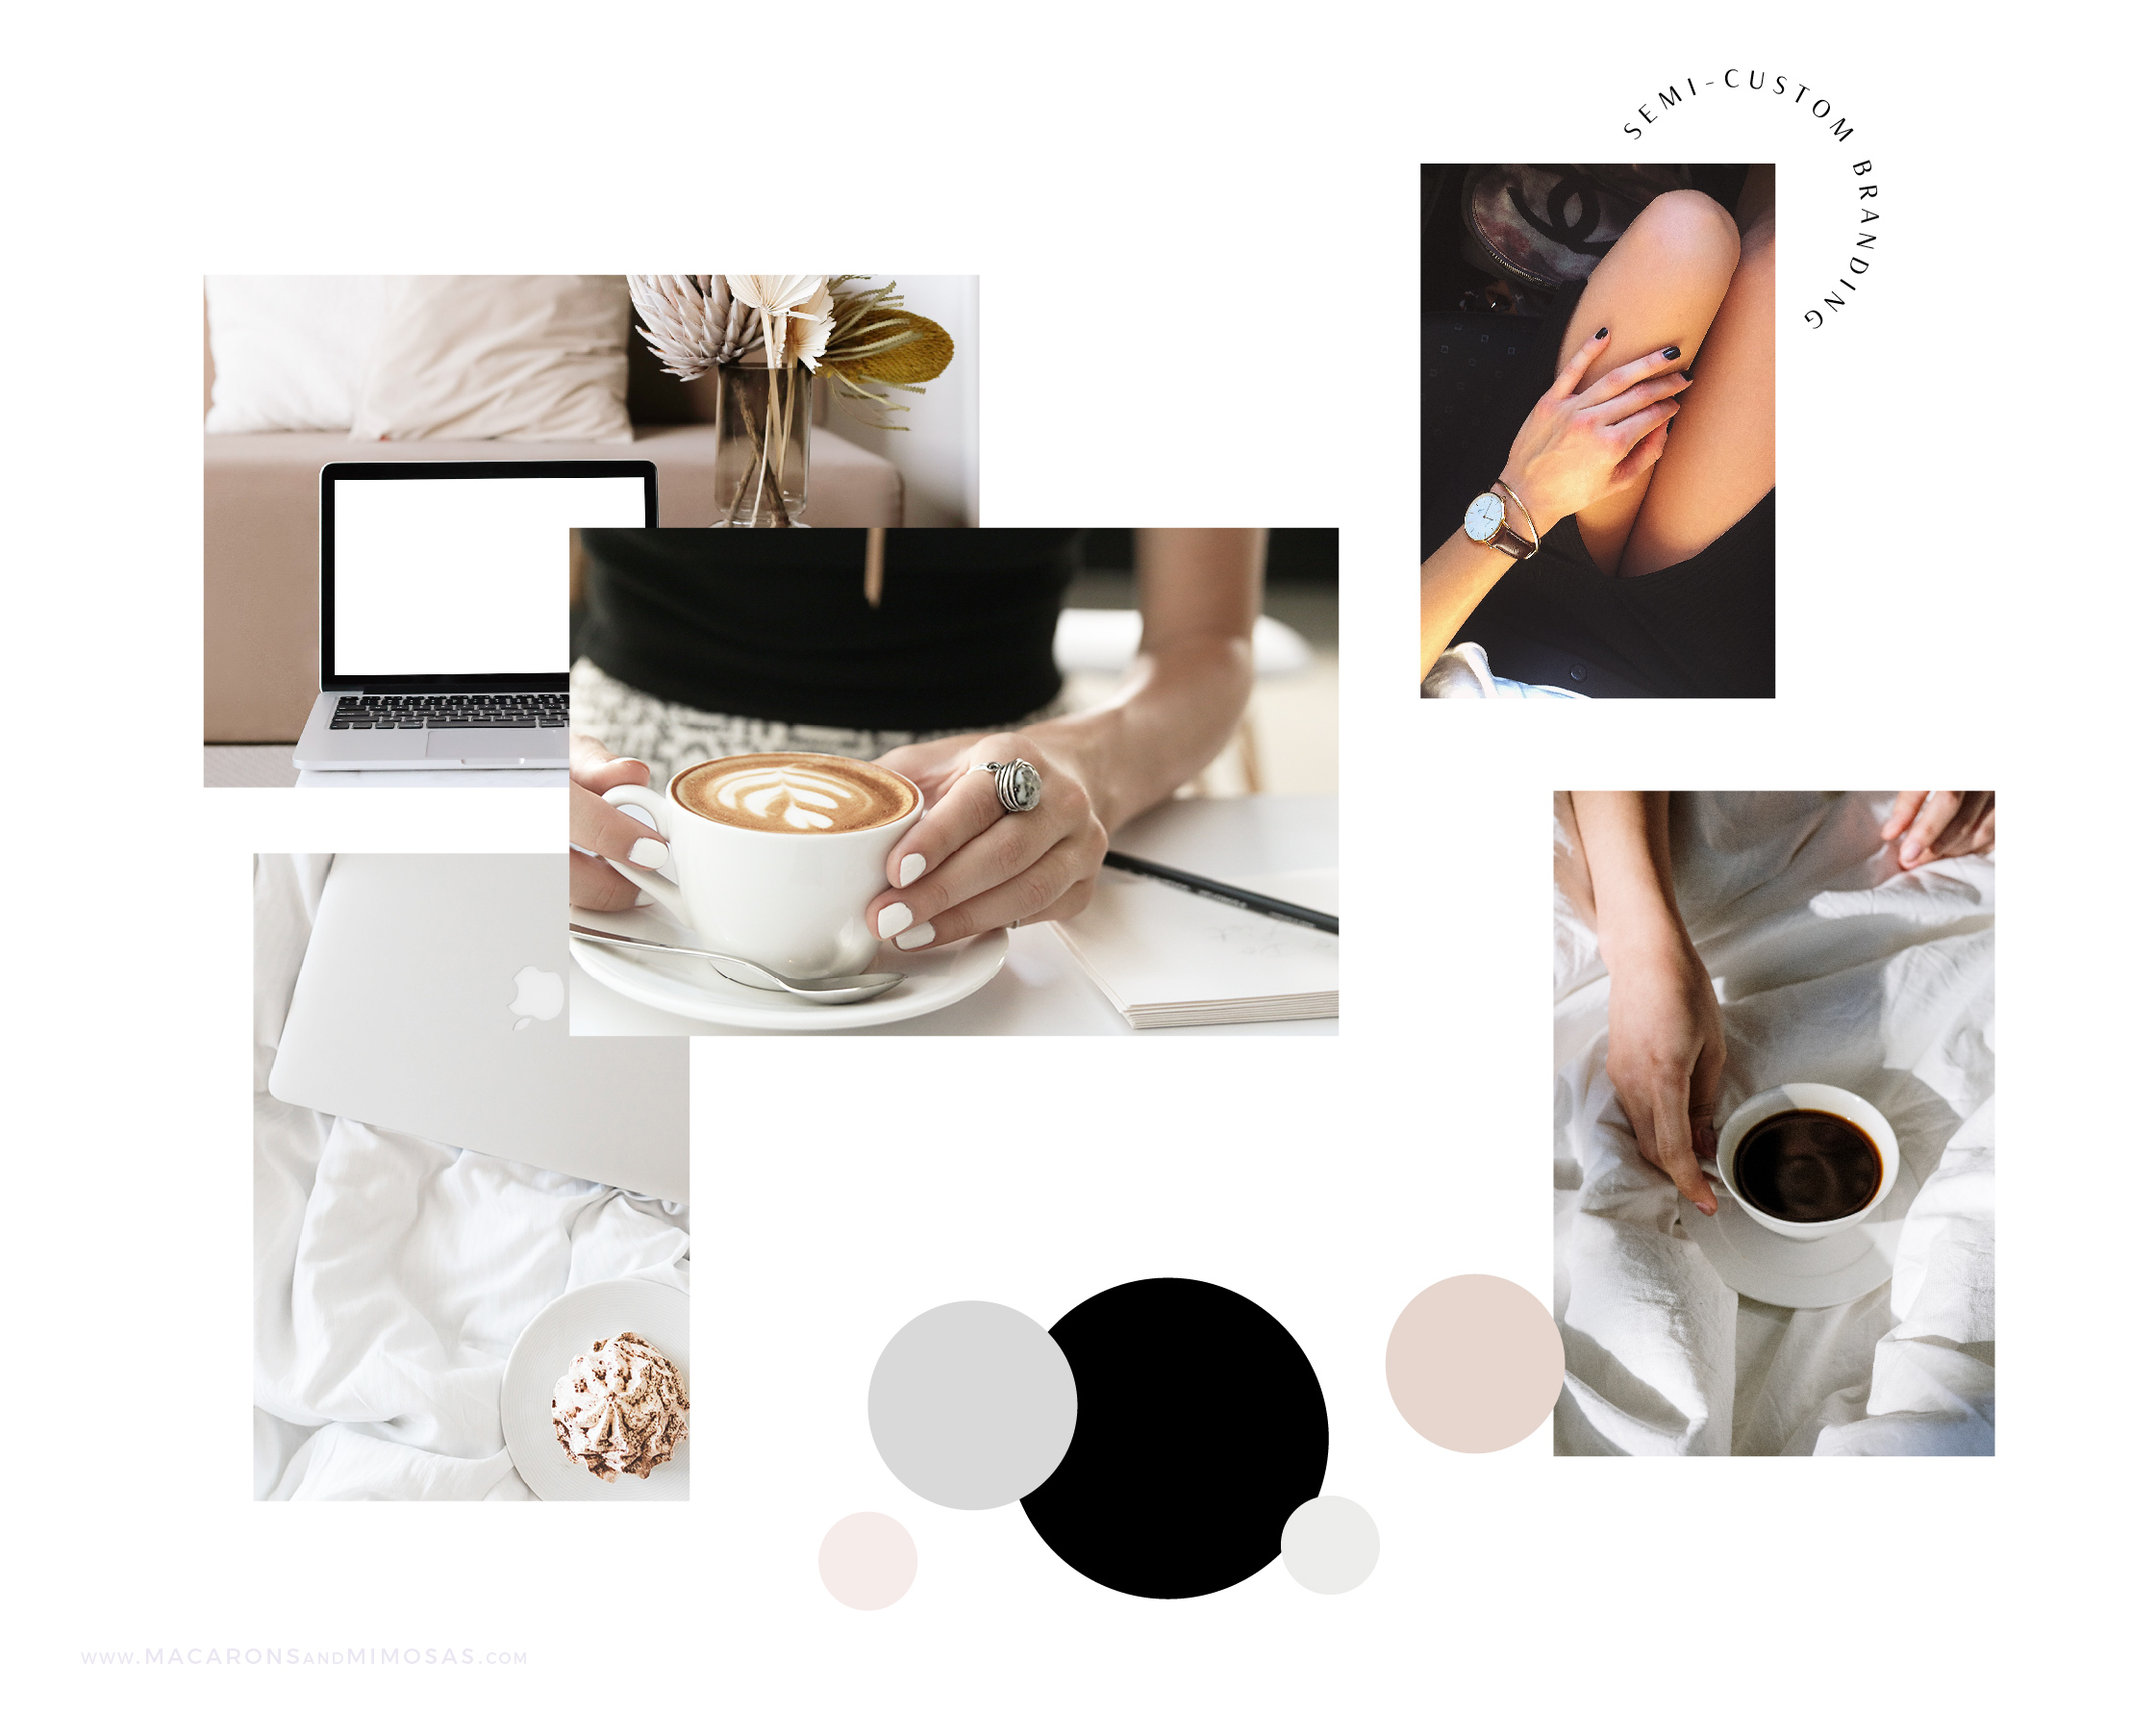 Modern Chic is an Editable Semi-Custom Brand Kit that includes Modern Business Card Design, Logo, Typography suggestions Curated Stock Photos, and more! 